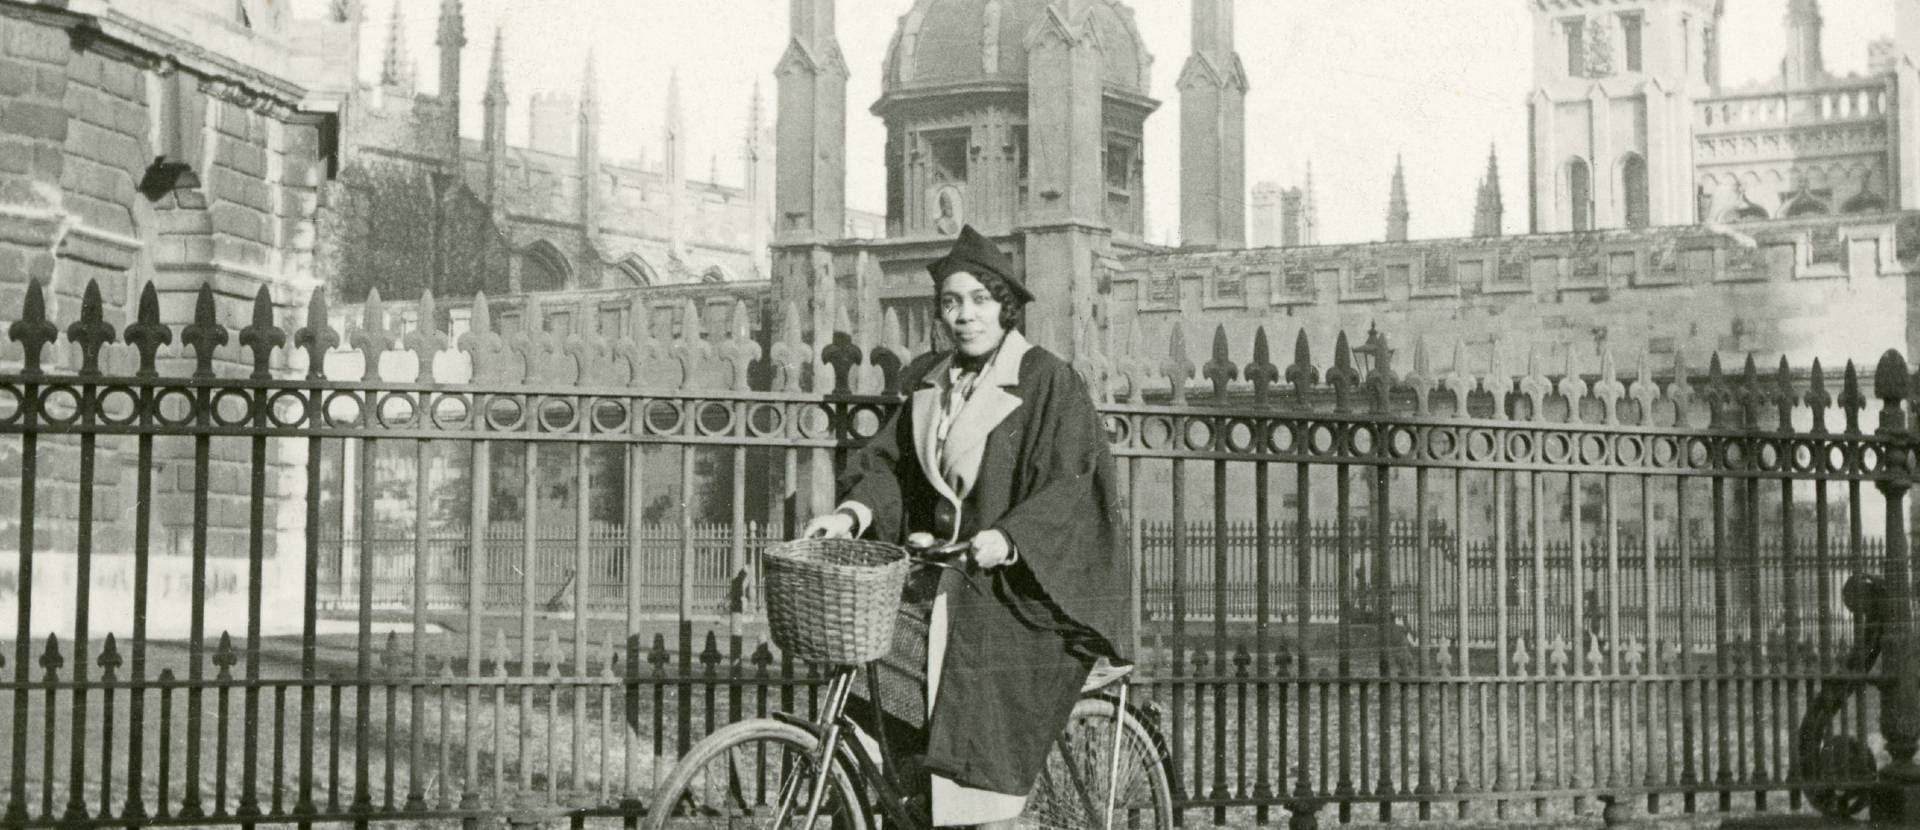 A person in university clothing riding a bike in Oxford